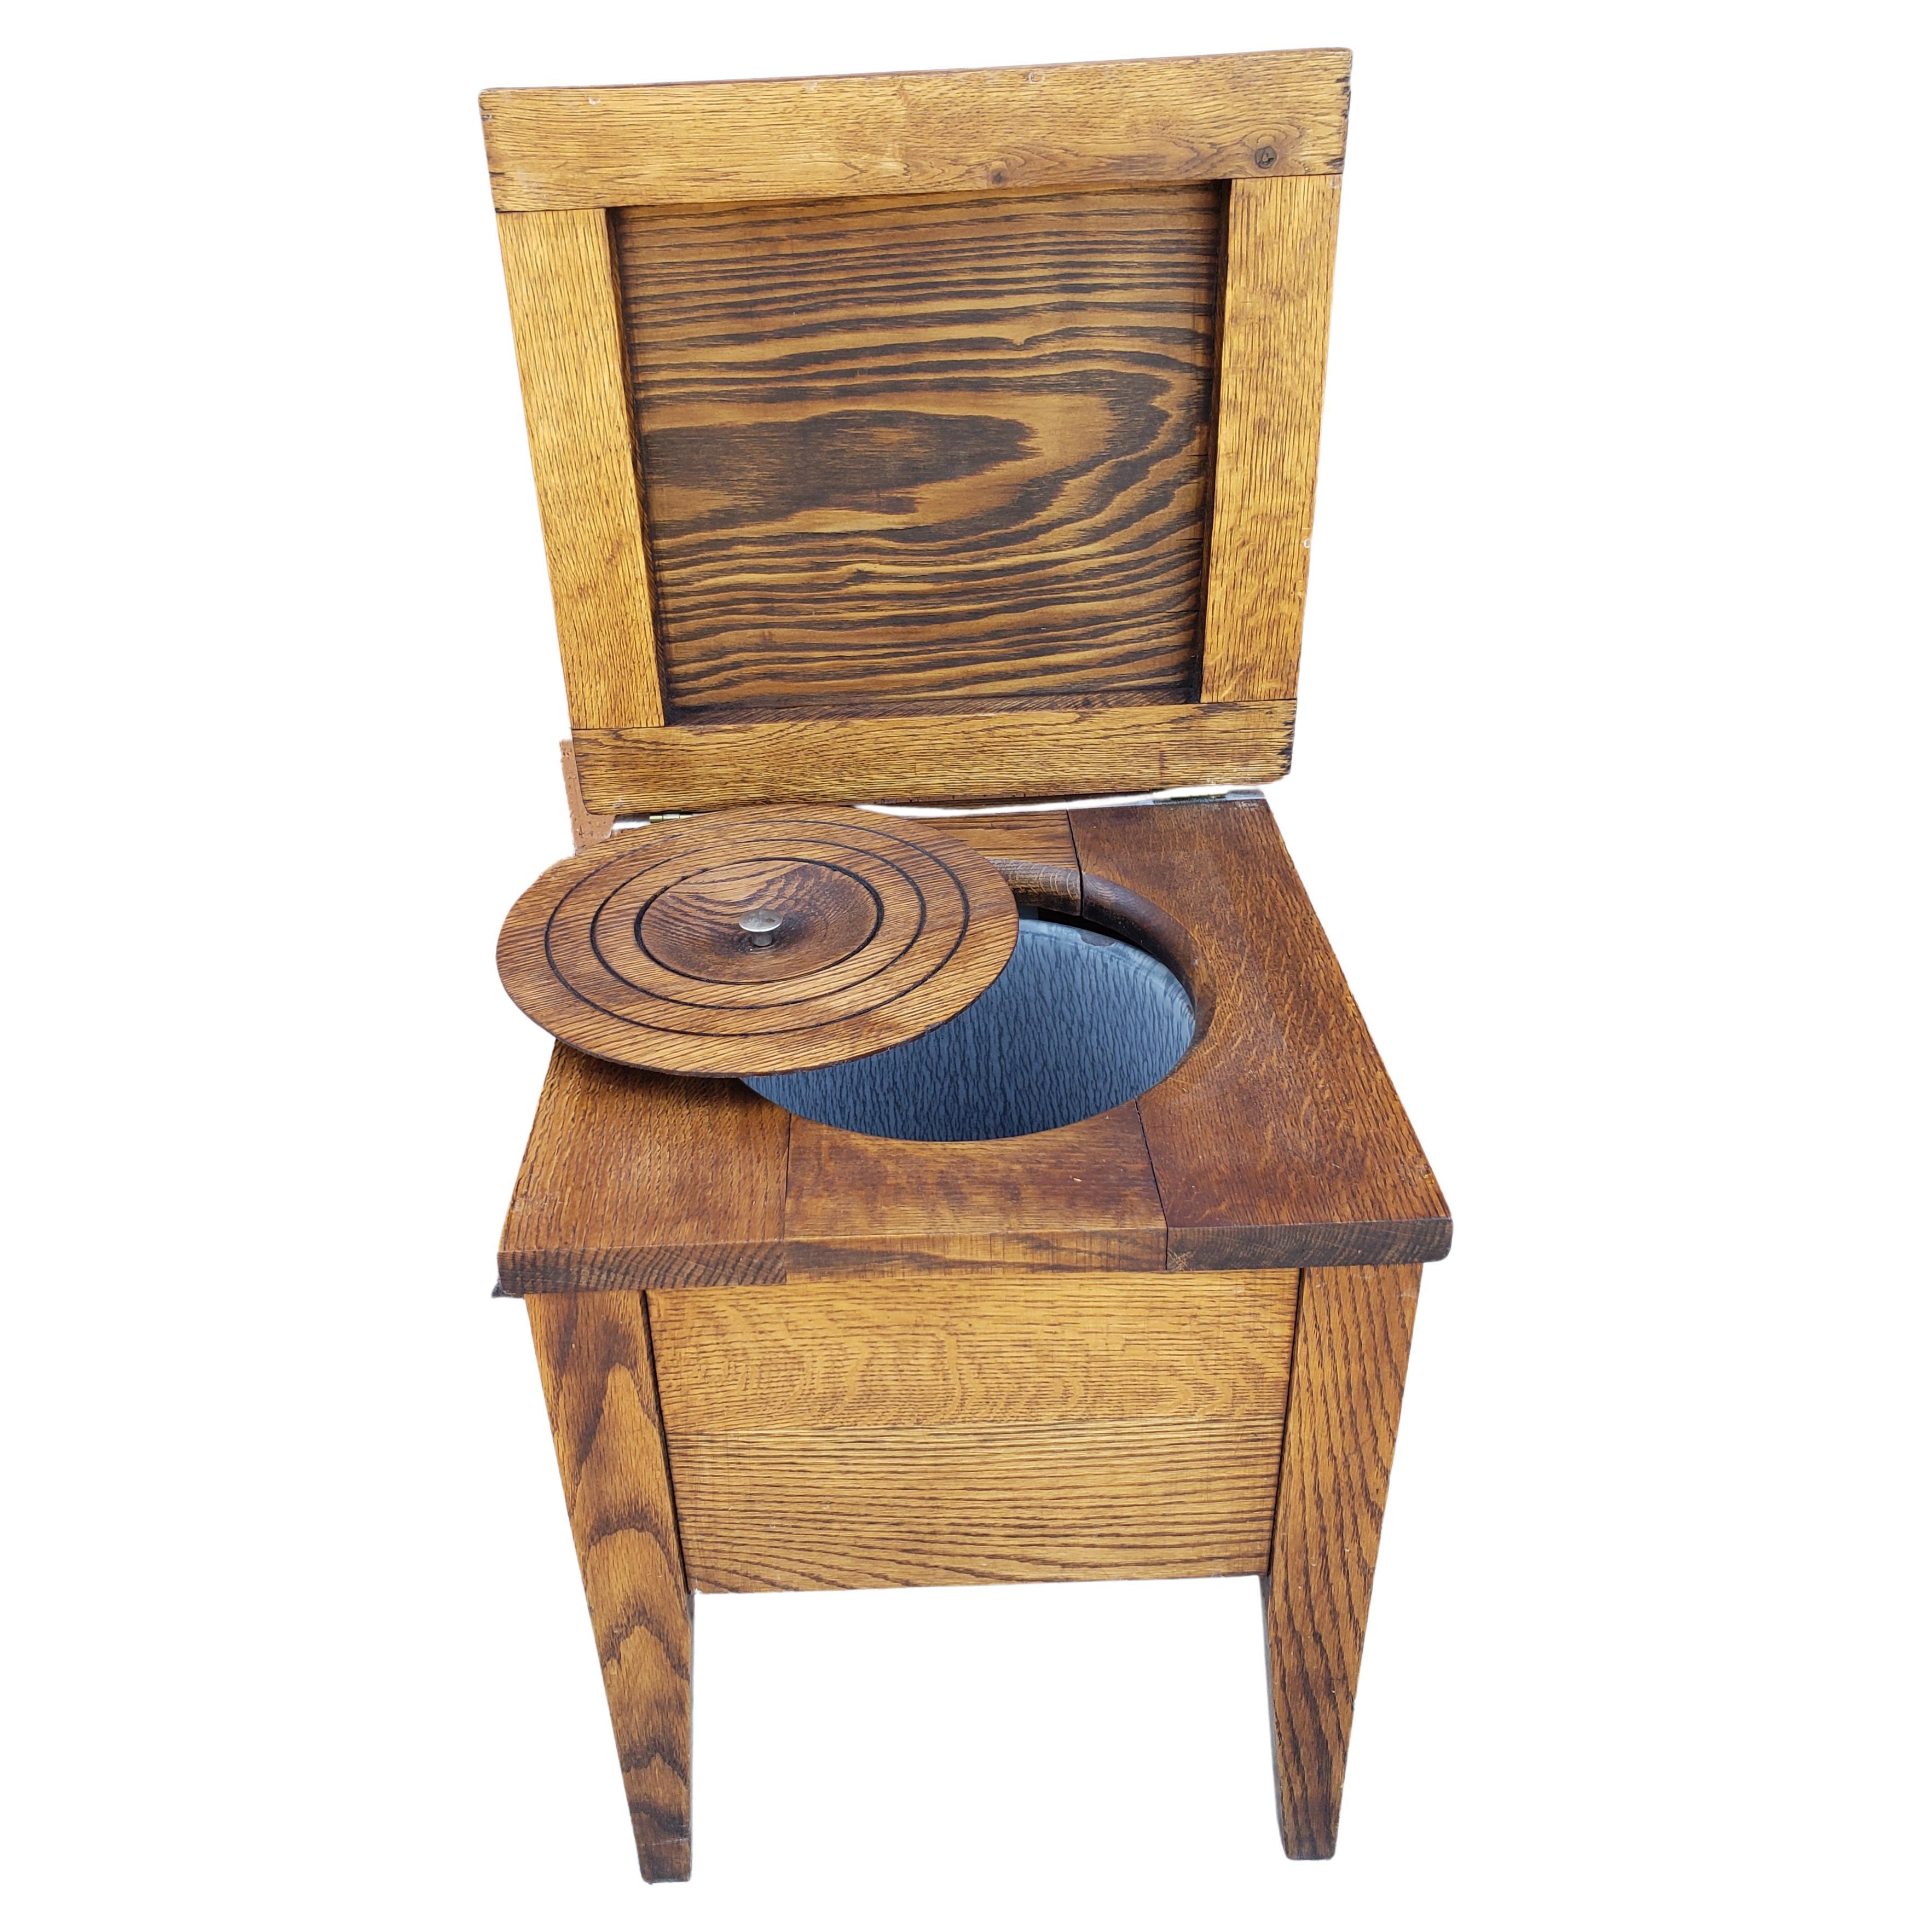 Hand-Crafted Vintage Mission Oak Flip-Top Low Stool Commode Trash Box Bucket For Sale